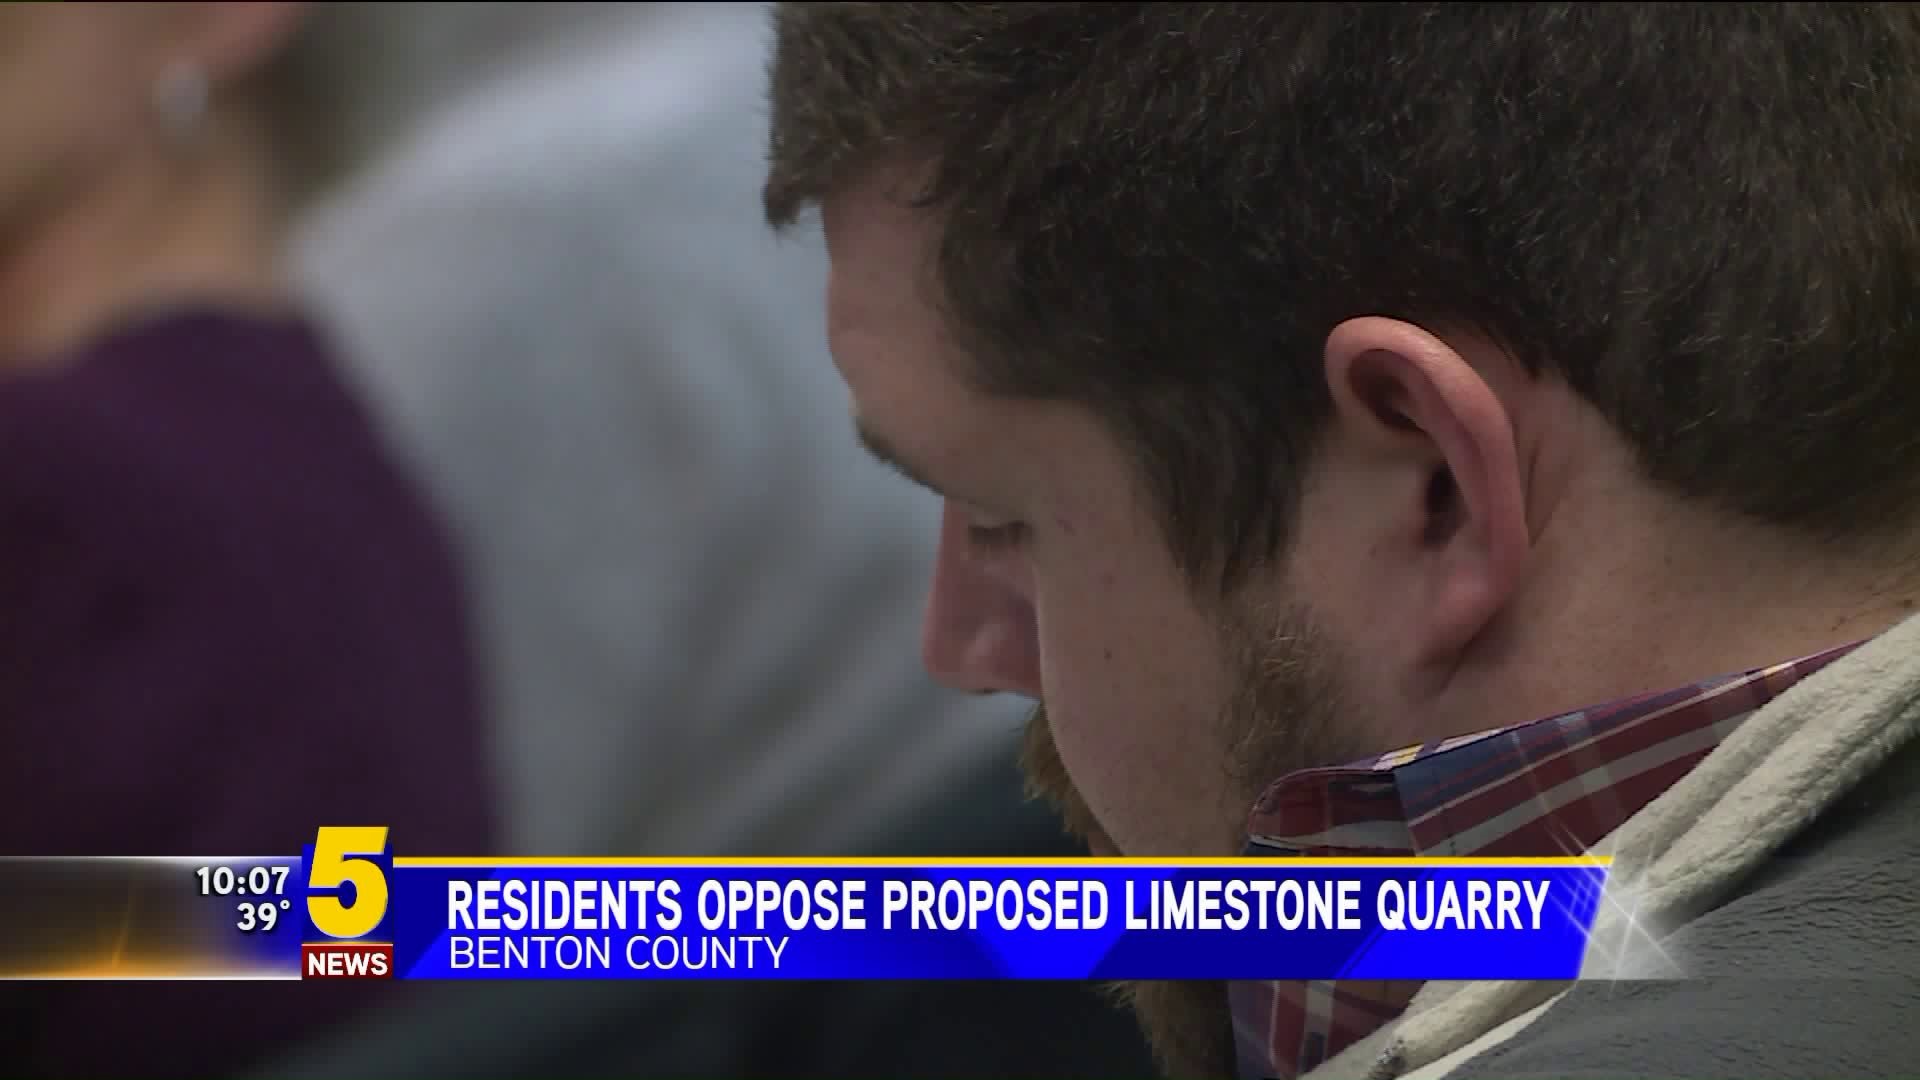 Residents Oppose Proposed Limestone Quarry in Benton County